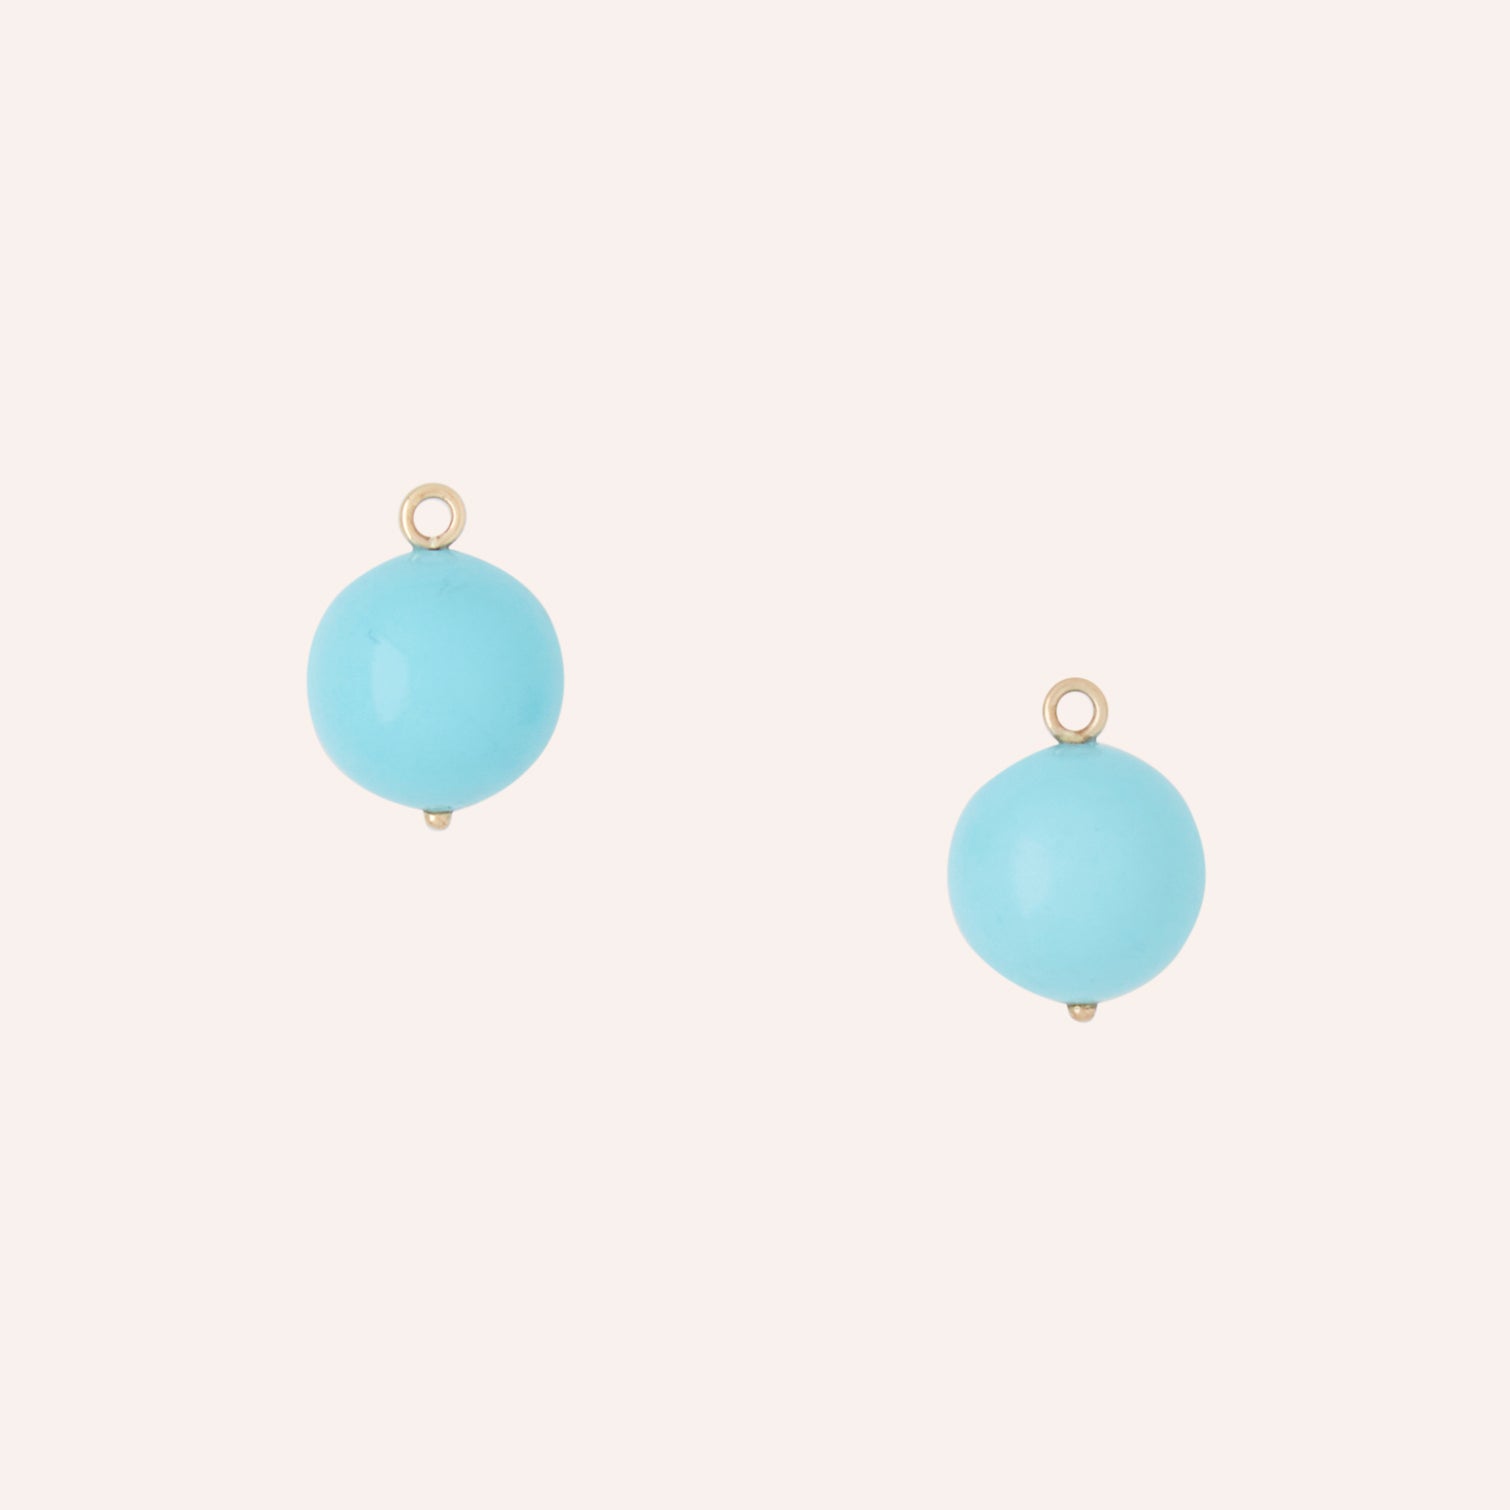 Victoire Reconstituted Turquoise 14mm Earring Drops